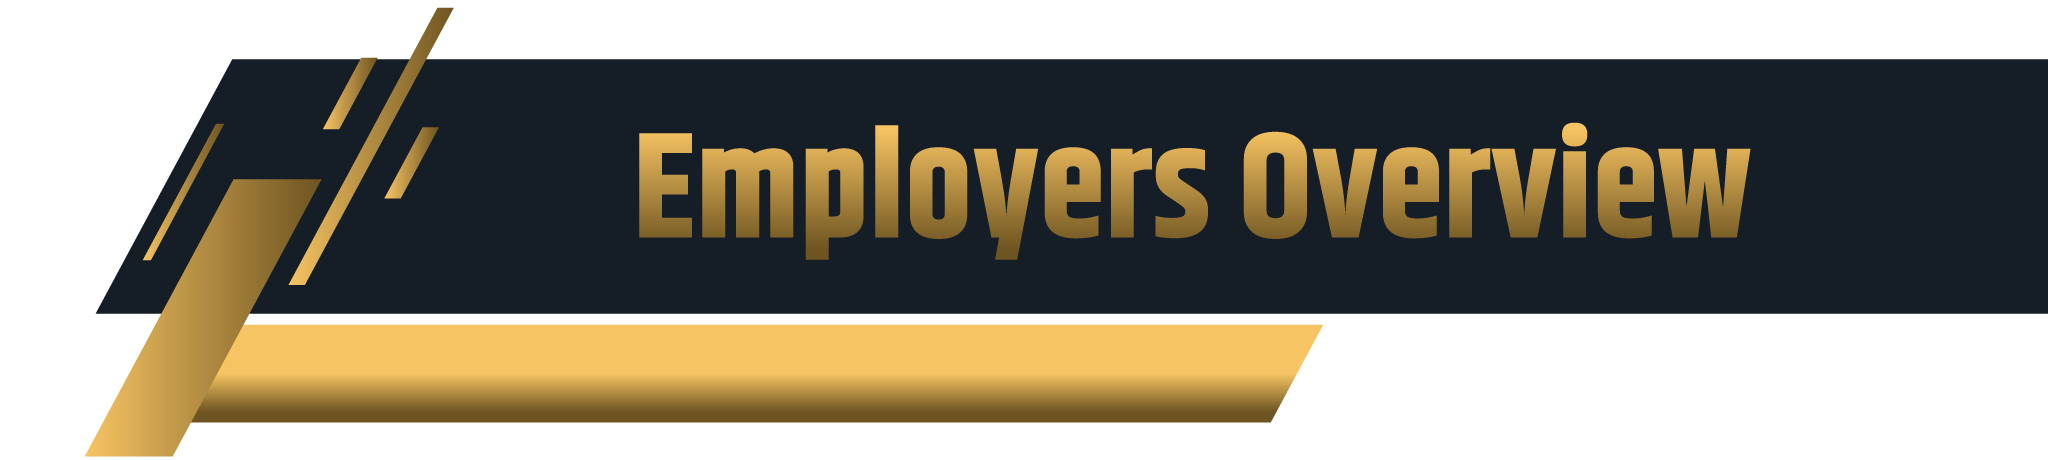 Employers-Overview